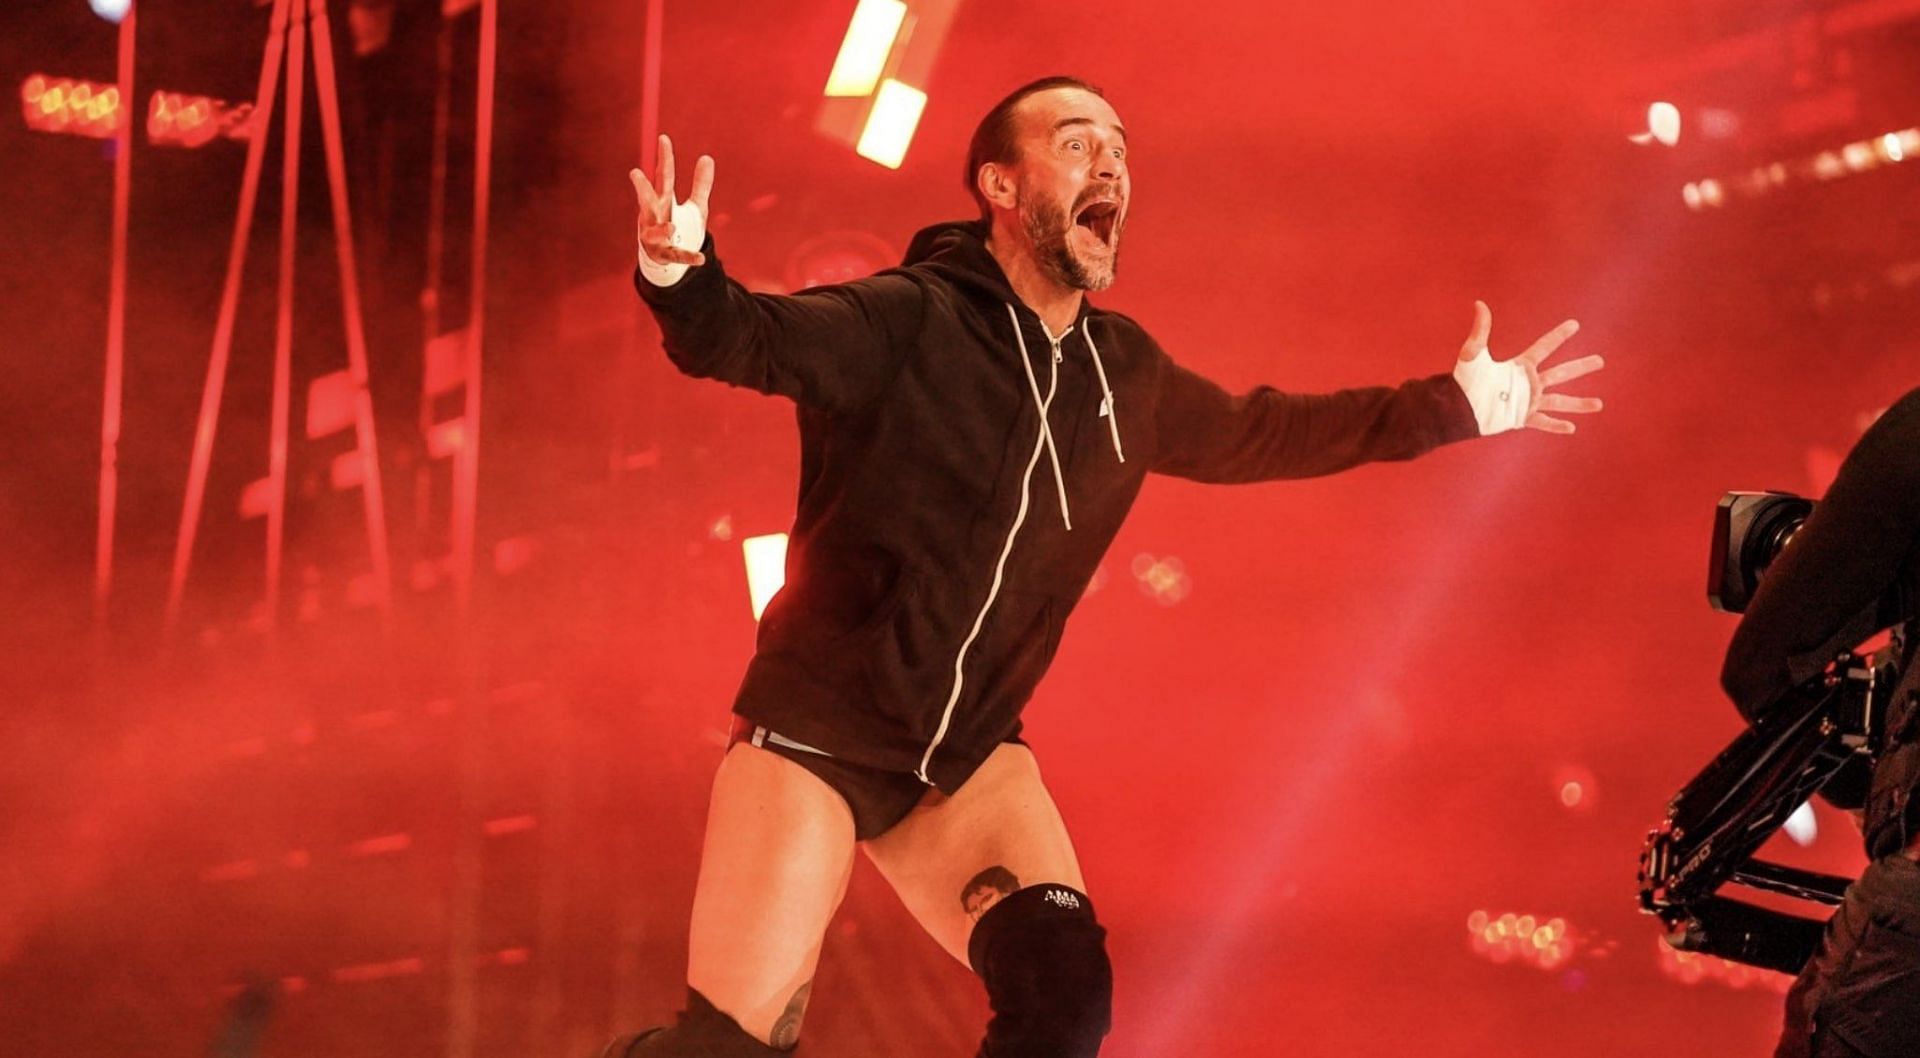 CM Punk suffered his first loss to MJF in Chicago, Illinois